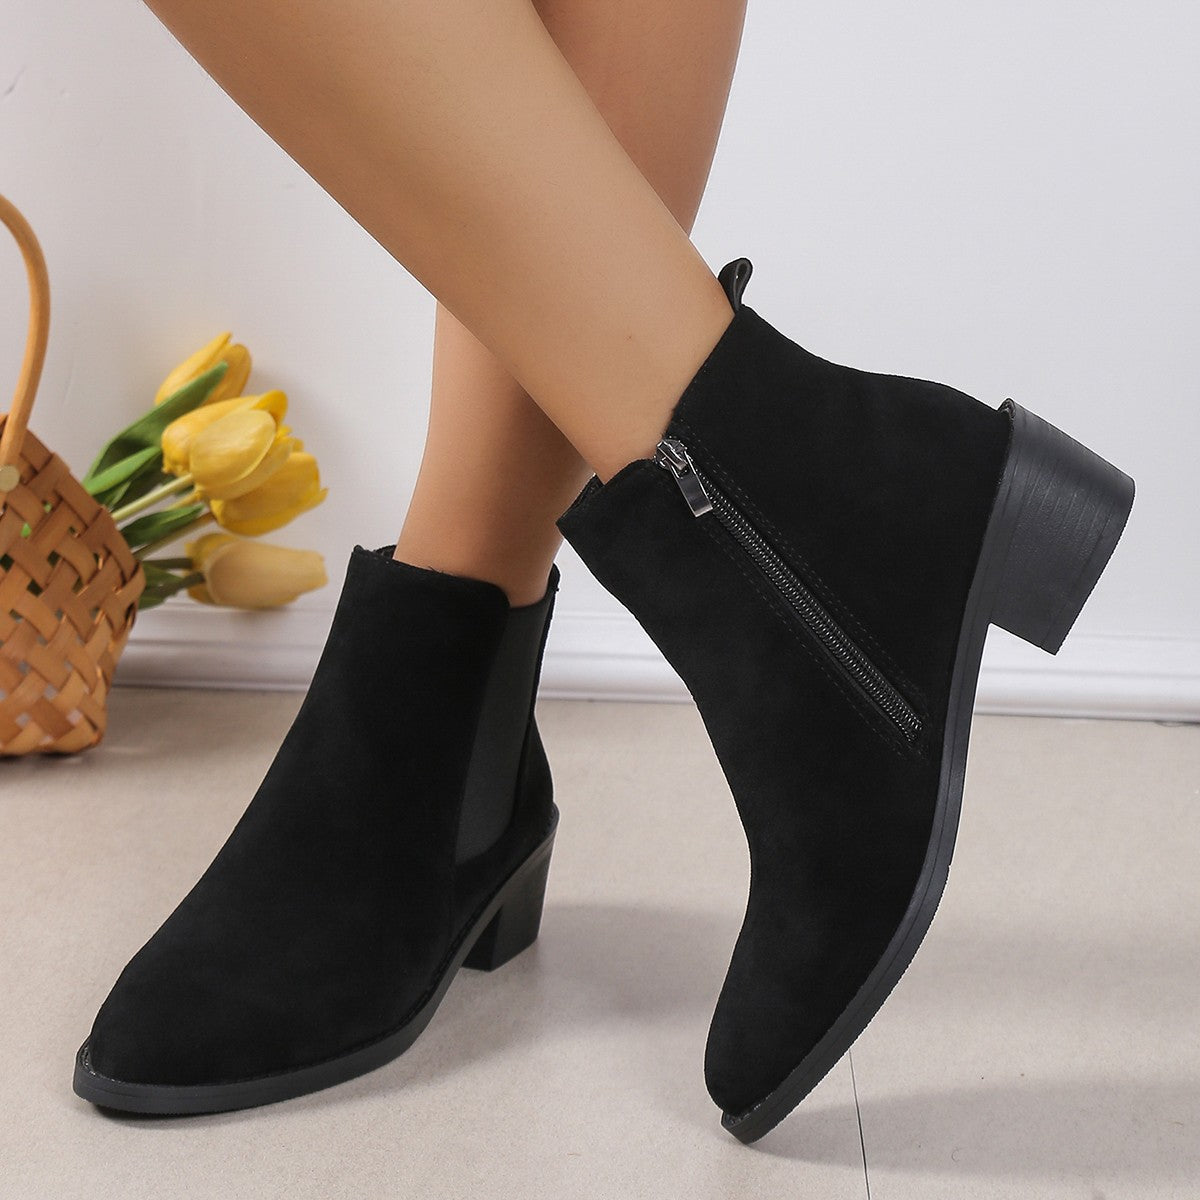 Women's Fashion Ankle Boots With Side Zipper Chunky Heel Boots